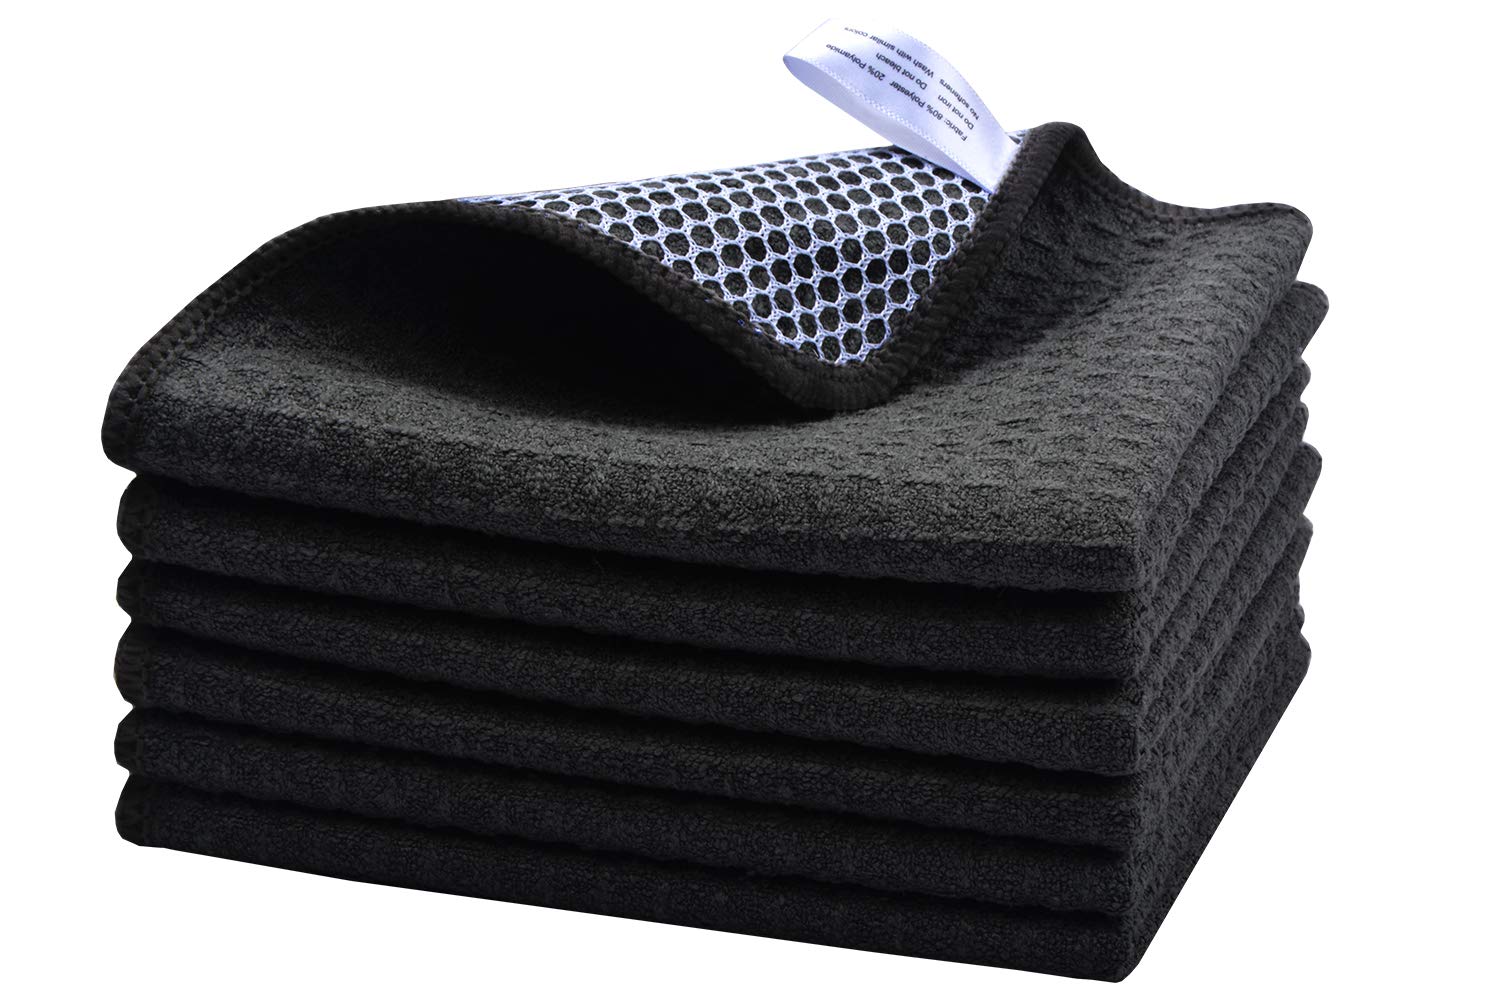 KinHwa Microfiber Dish Cloths for Washing Dishes Washable Dishcloths Kitchen Dish Rags Cleaning Cloths with Poly Scour Side 12 Inch x 12 Inch 6Pack Black